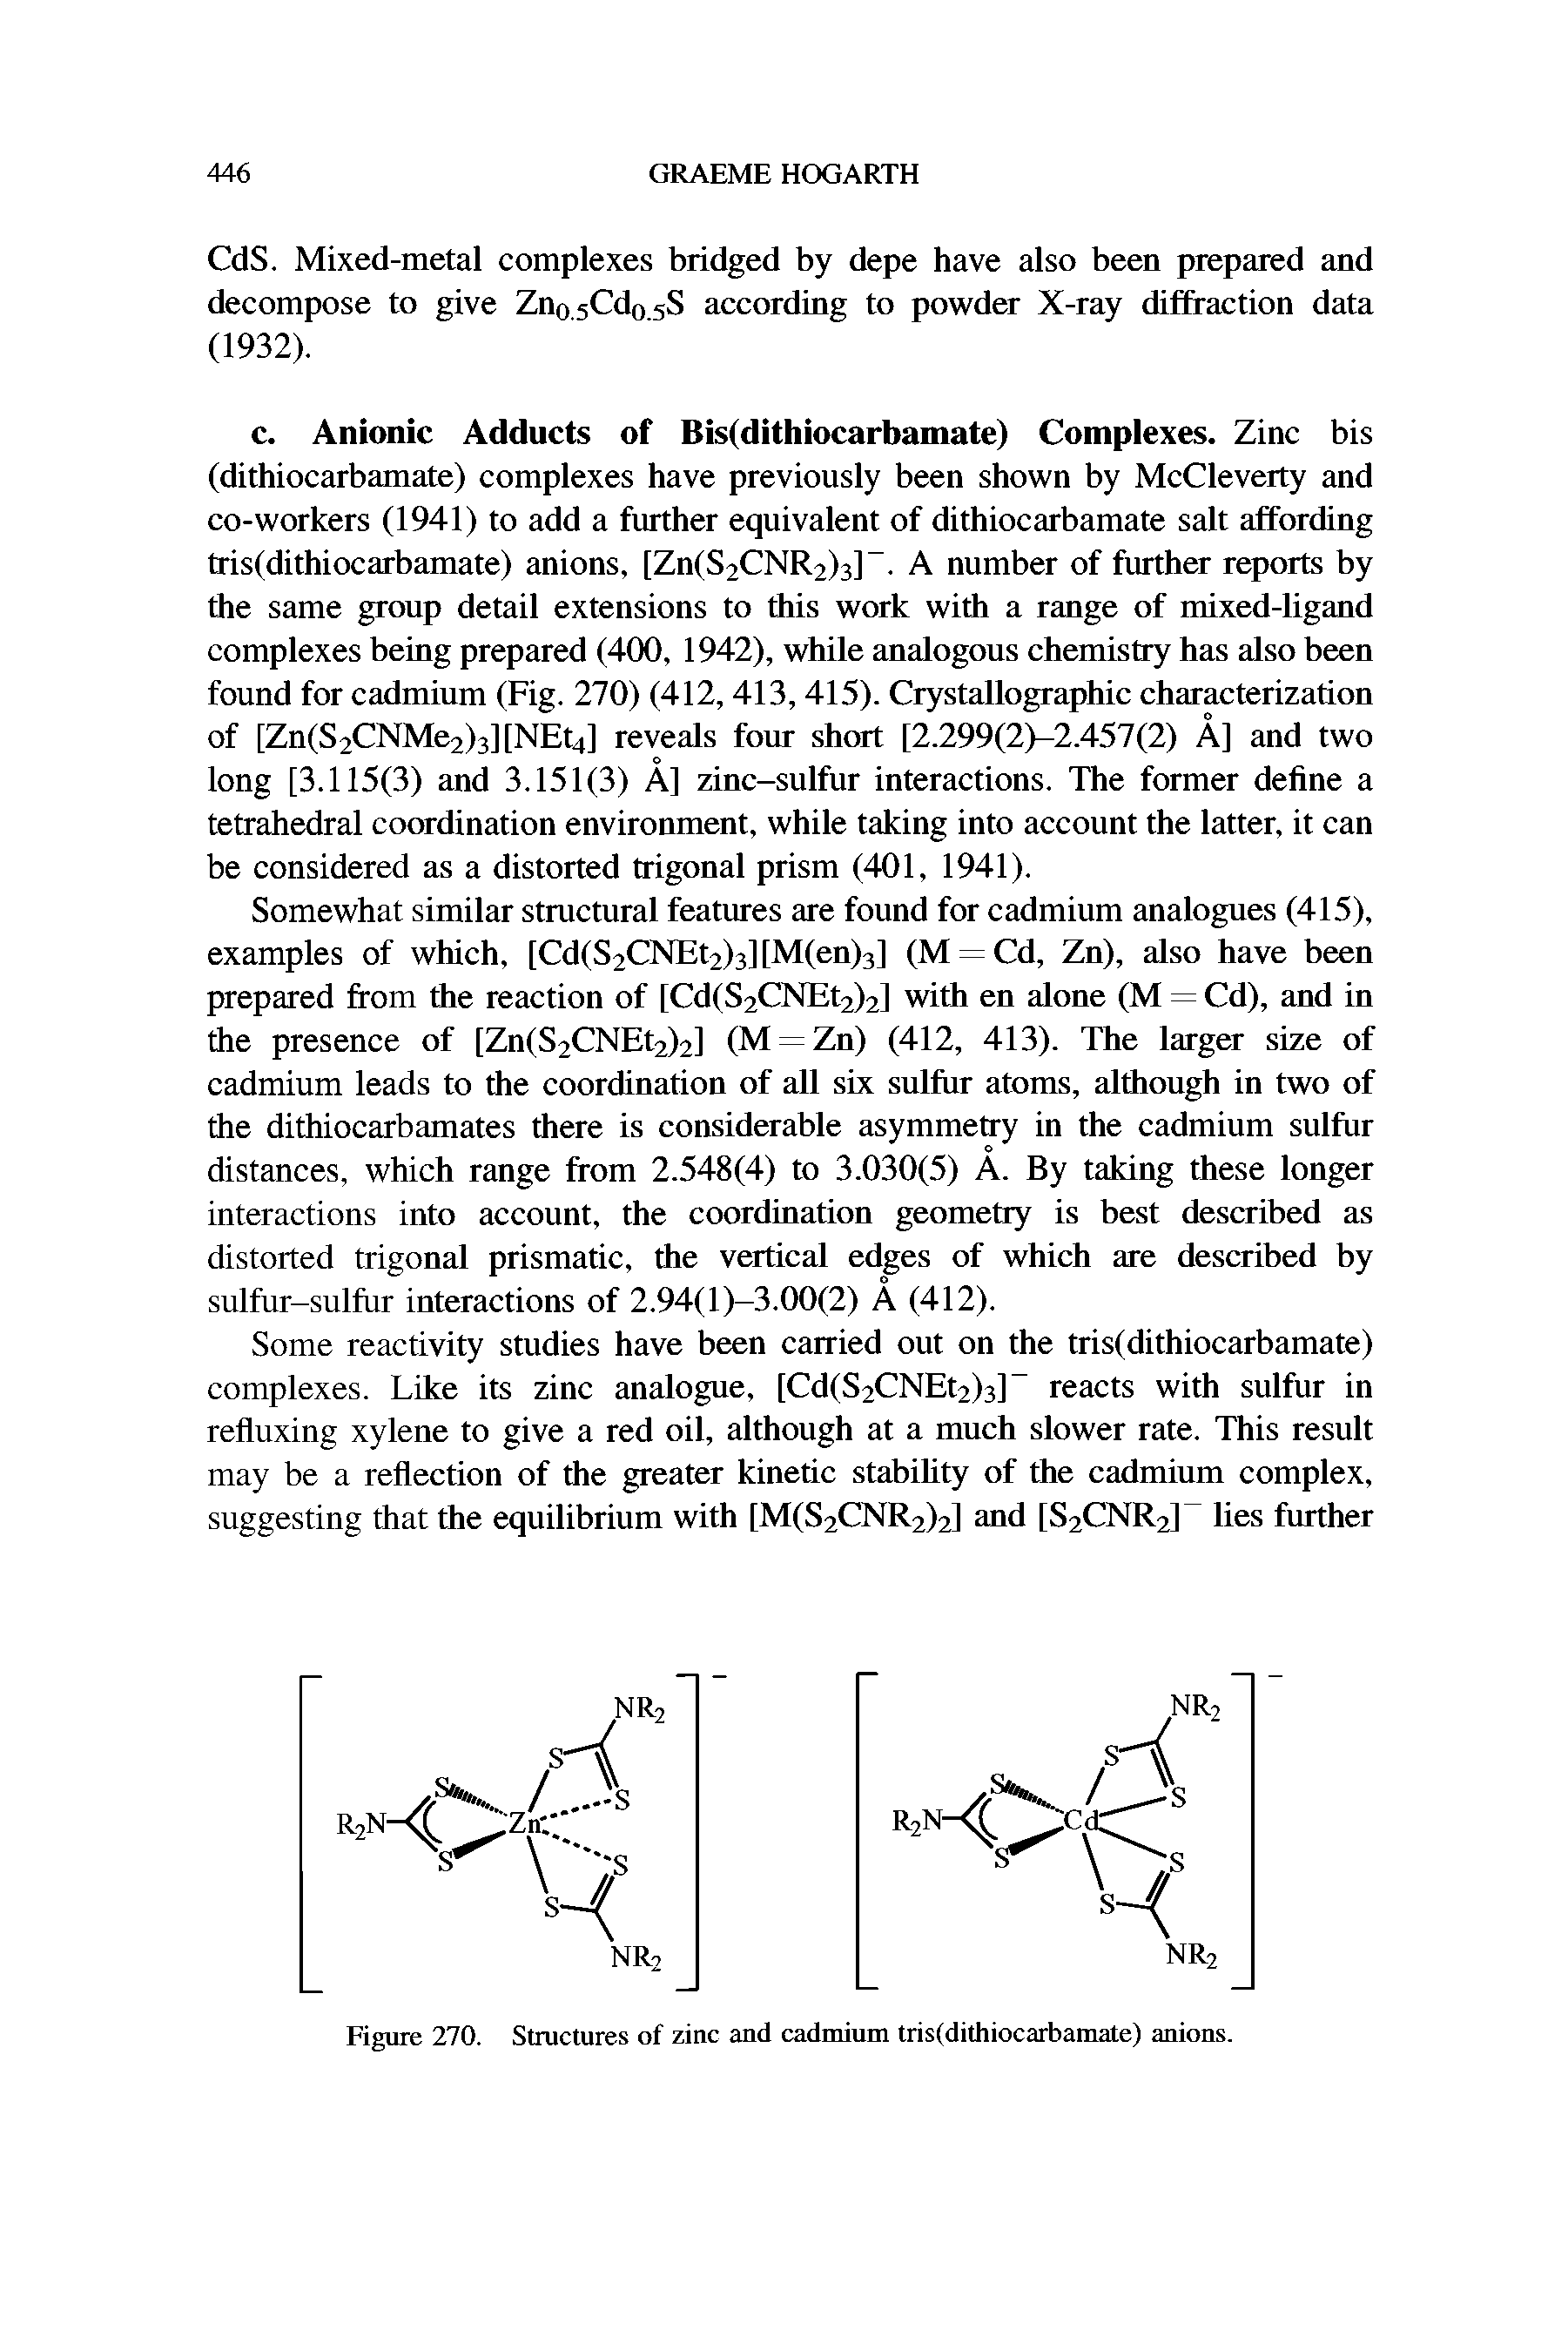 Figure 270. Structures of zinc and cadmium tris(dithiocarbamate) anions.